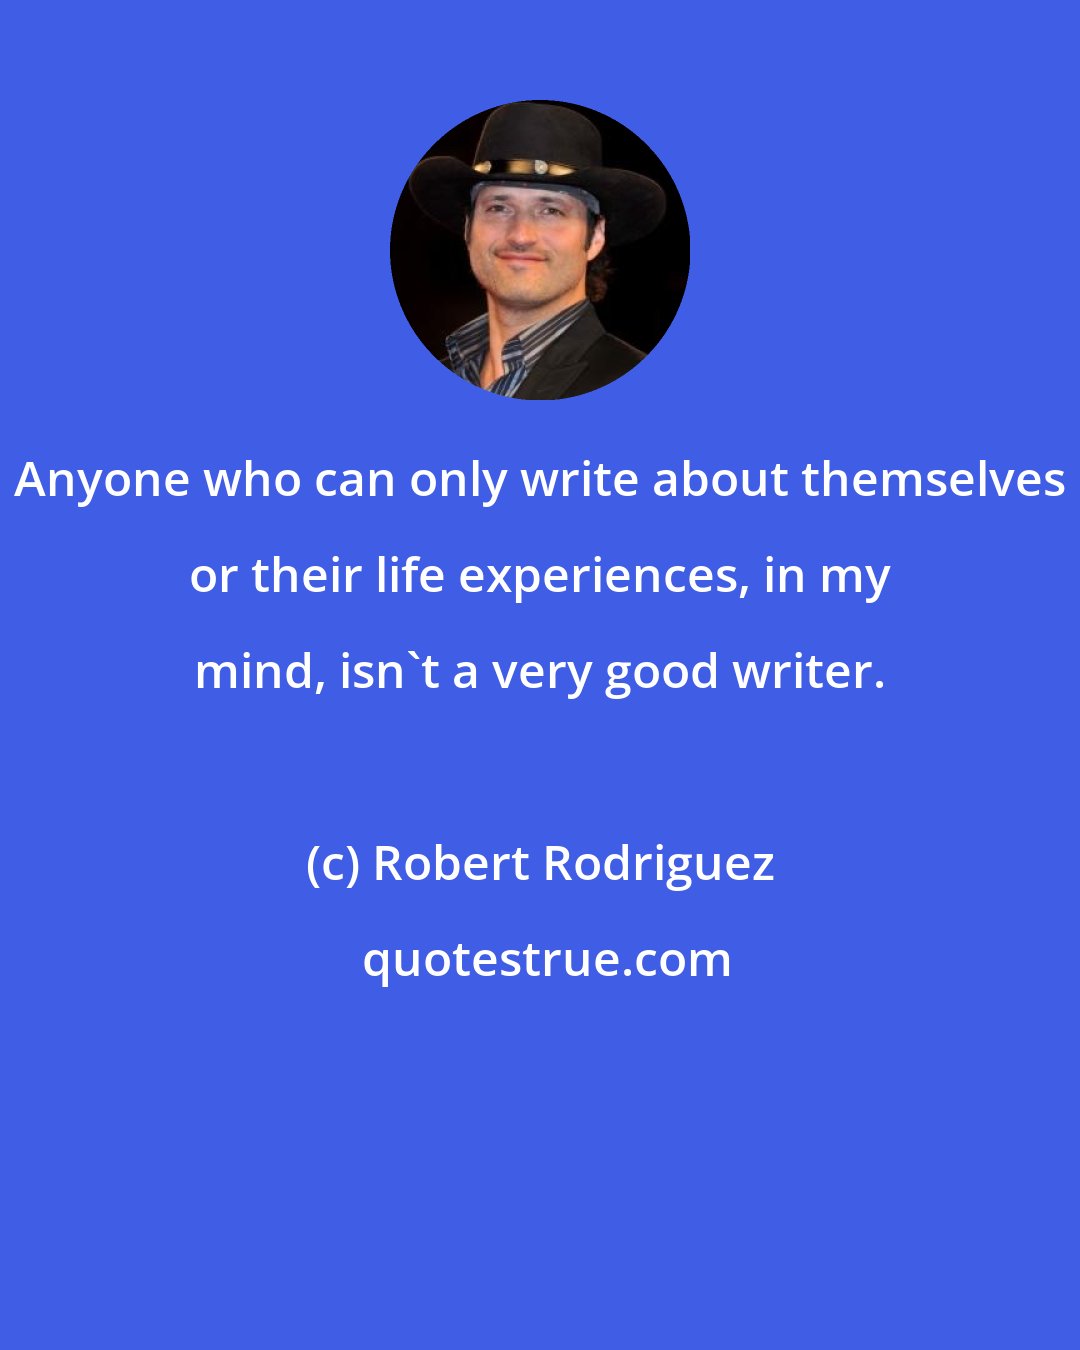 Robert Rodriguez: Anyone who can only write about themselves or their life experiences, in my mind, isn't a very good writer.